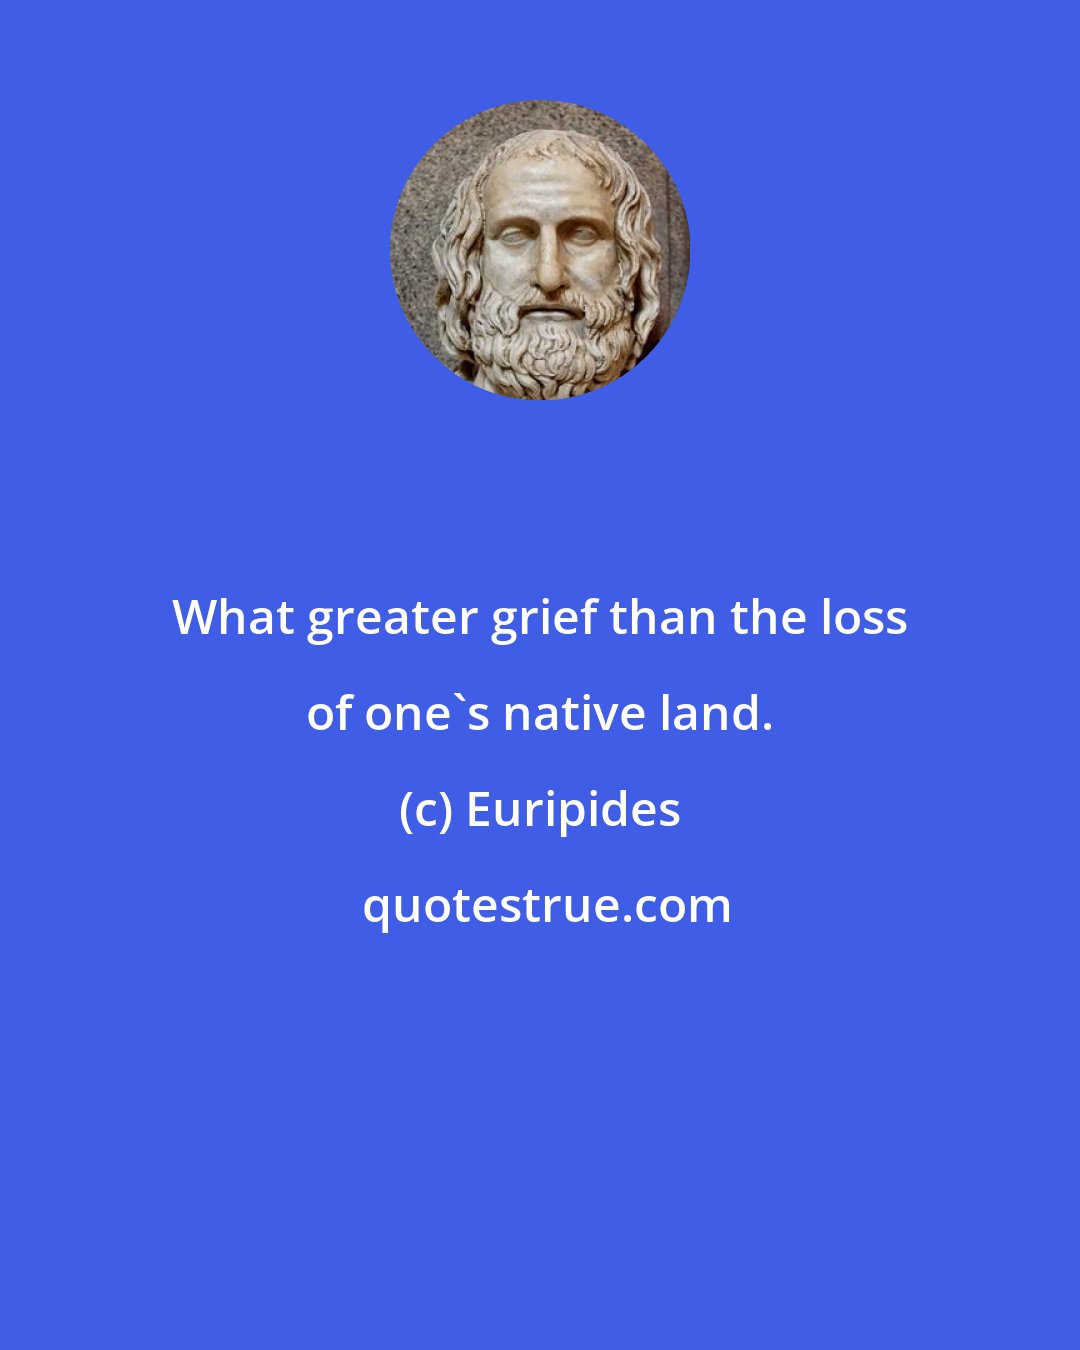 Euripides: What greater grief than the loss of one's native land.